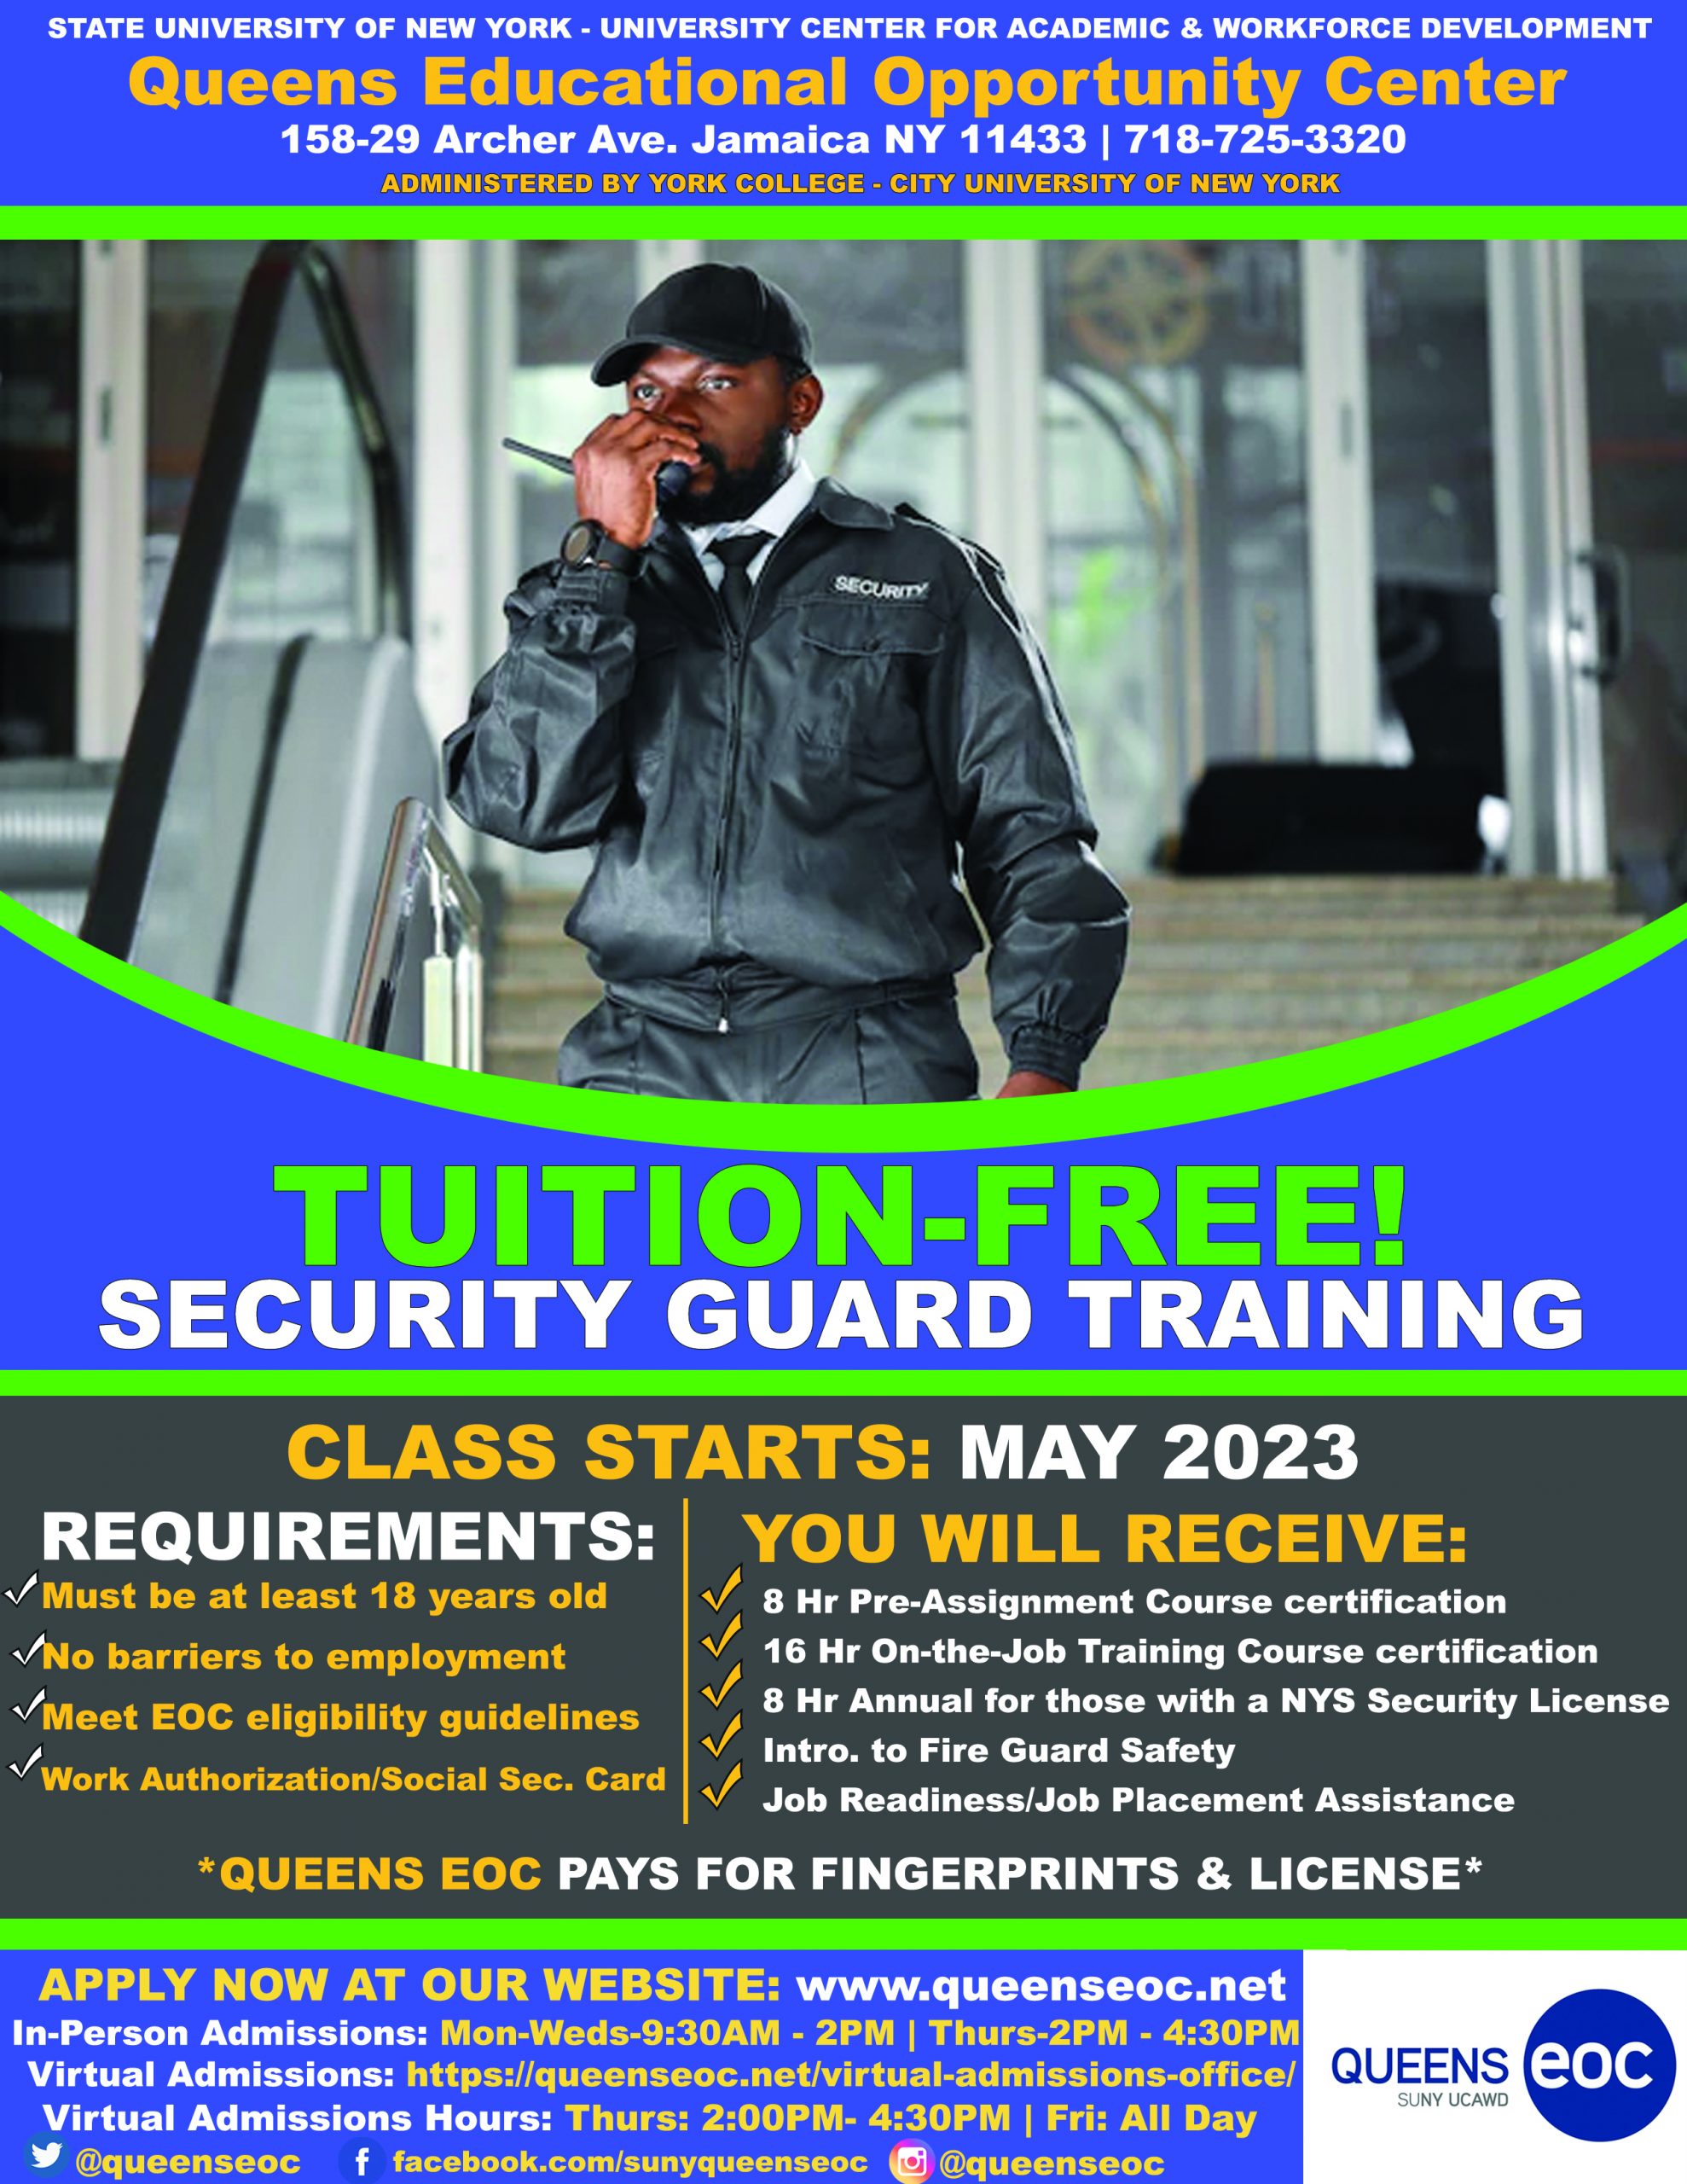 Security Guard Training Tuition Free Class Starts May 2023 SUNY